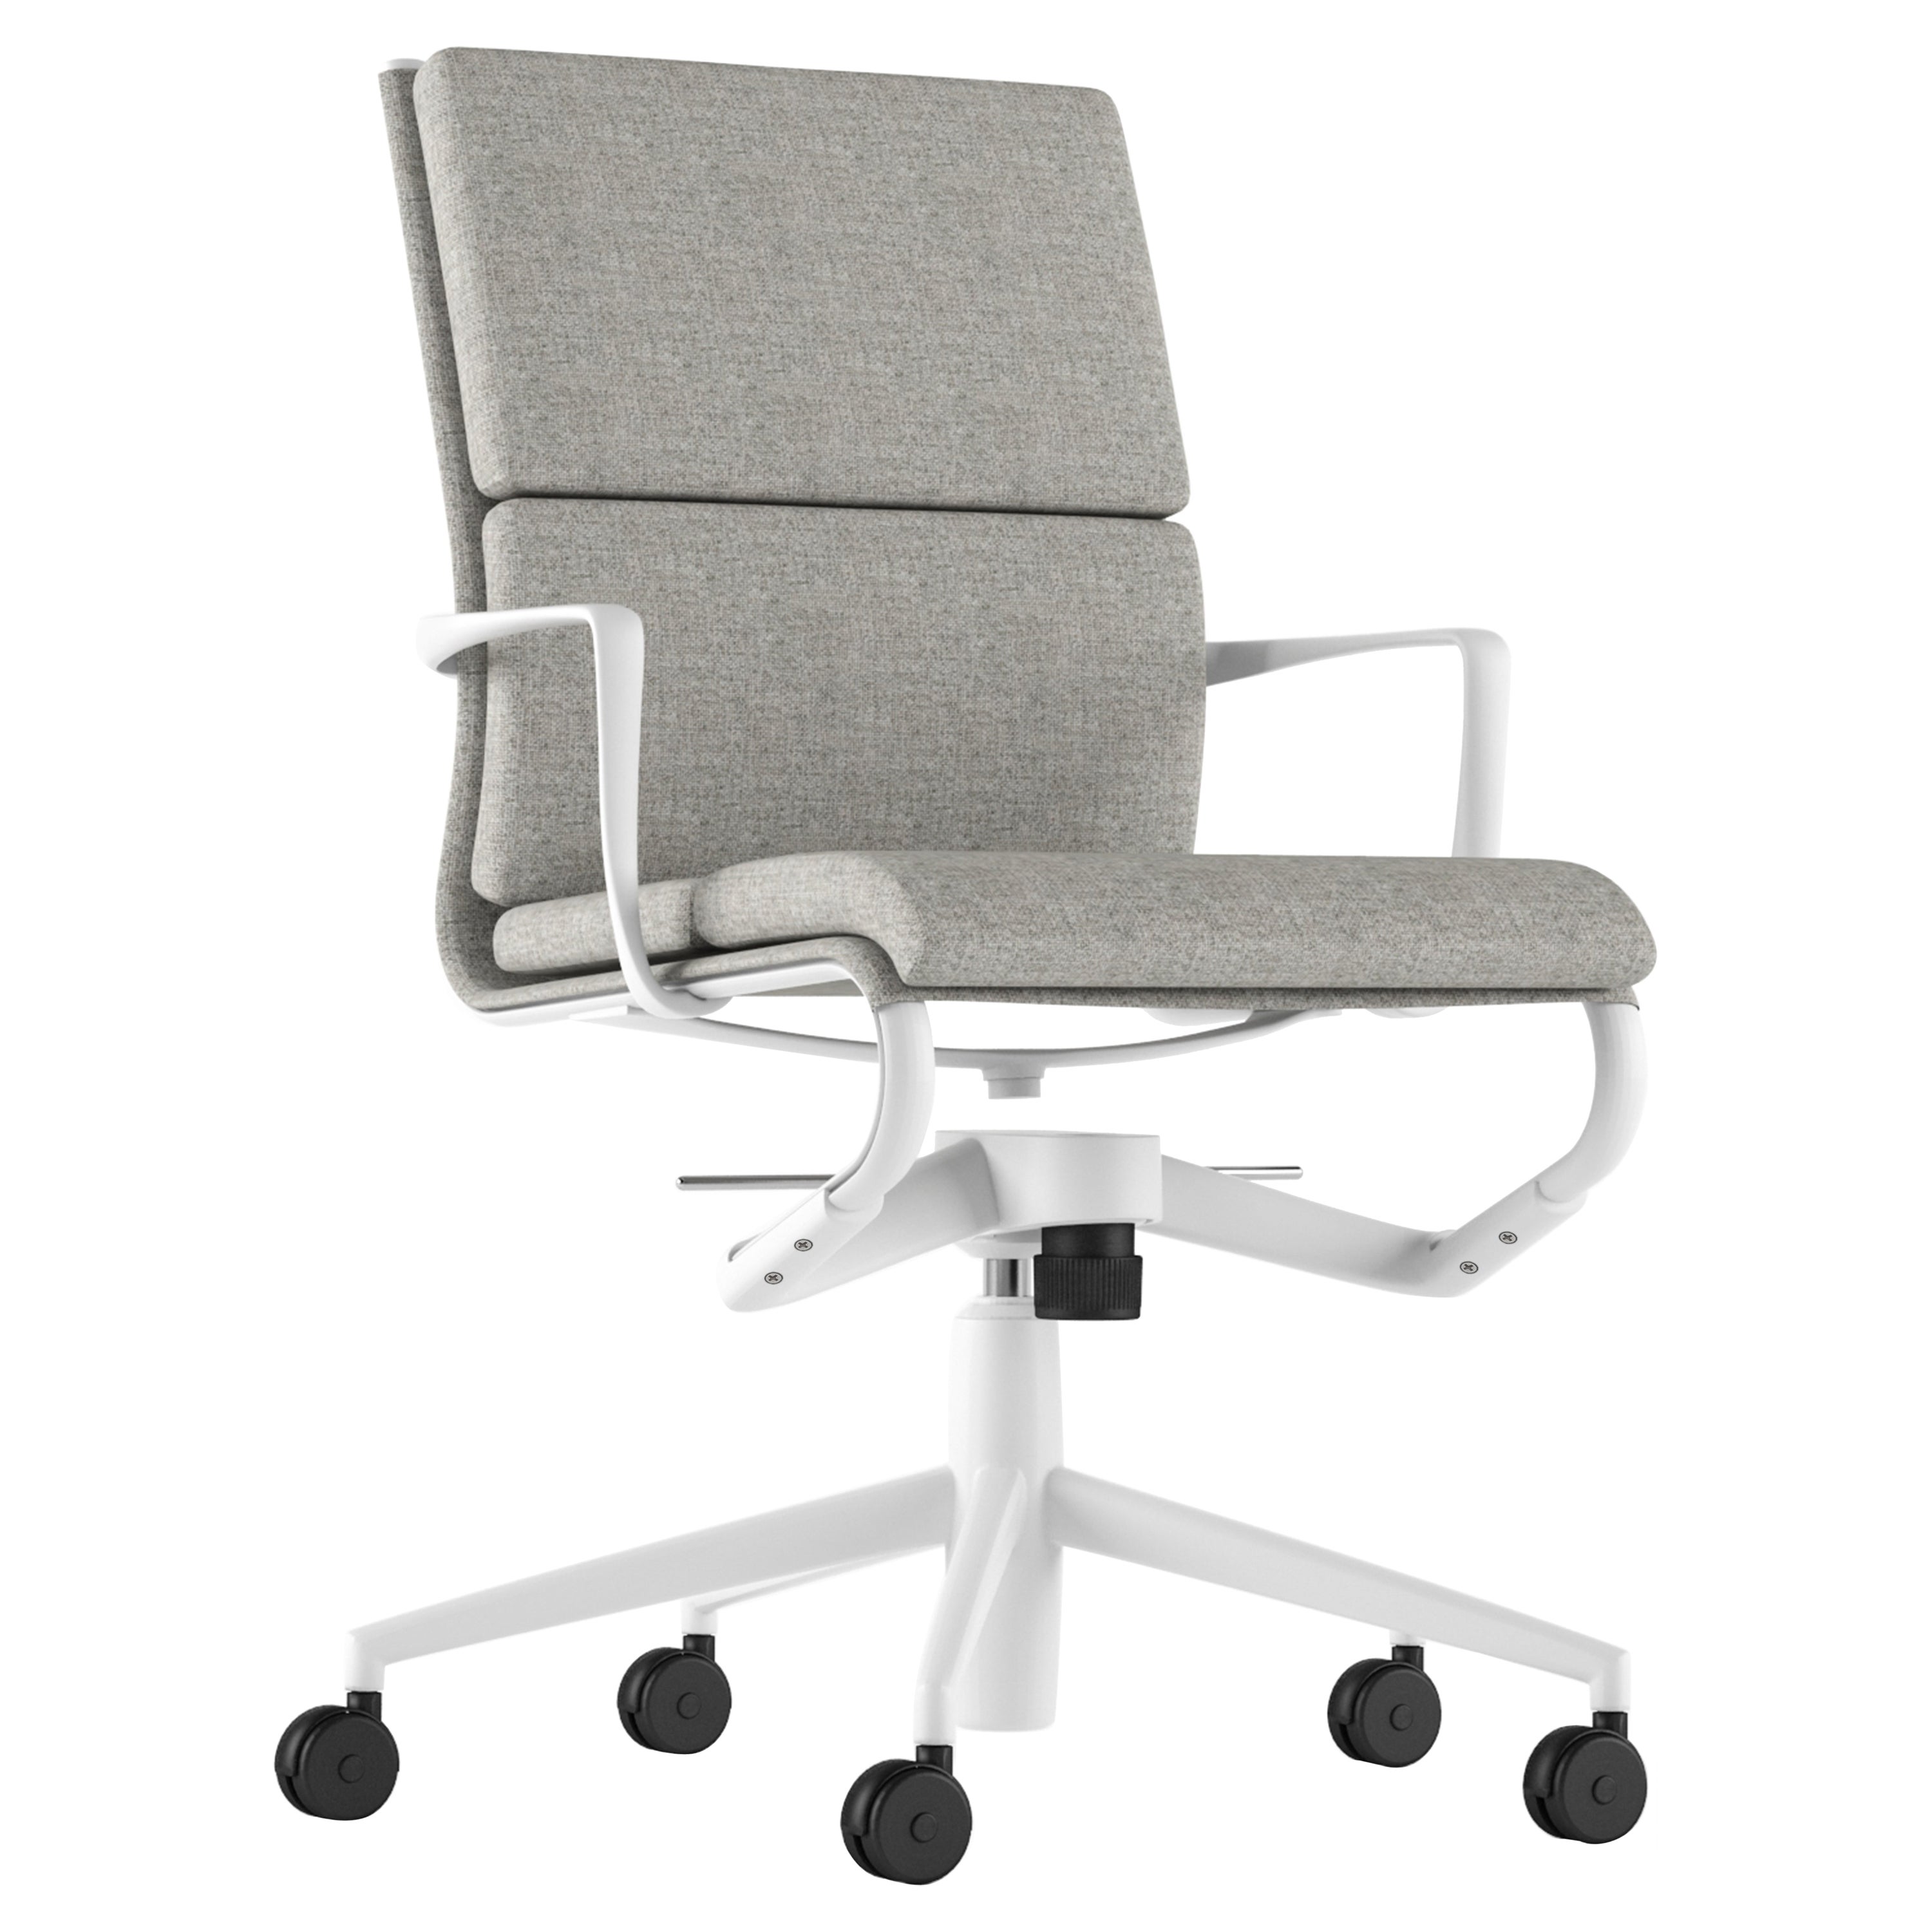 Alias 453 Rollingframe+ Tilt 47 Soft Chair in Grey w Lacquered Aluminum Frame